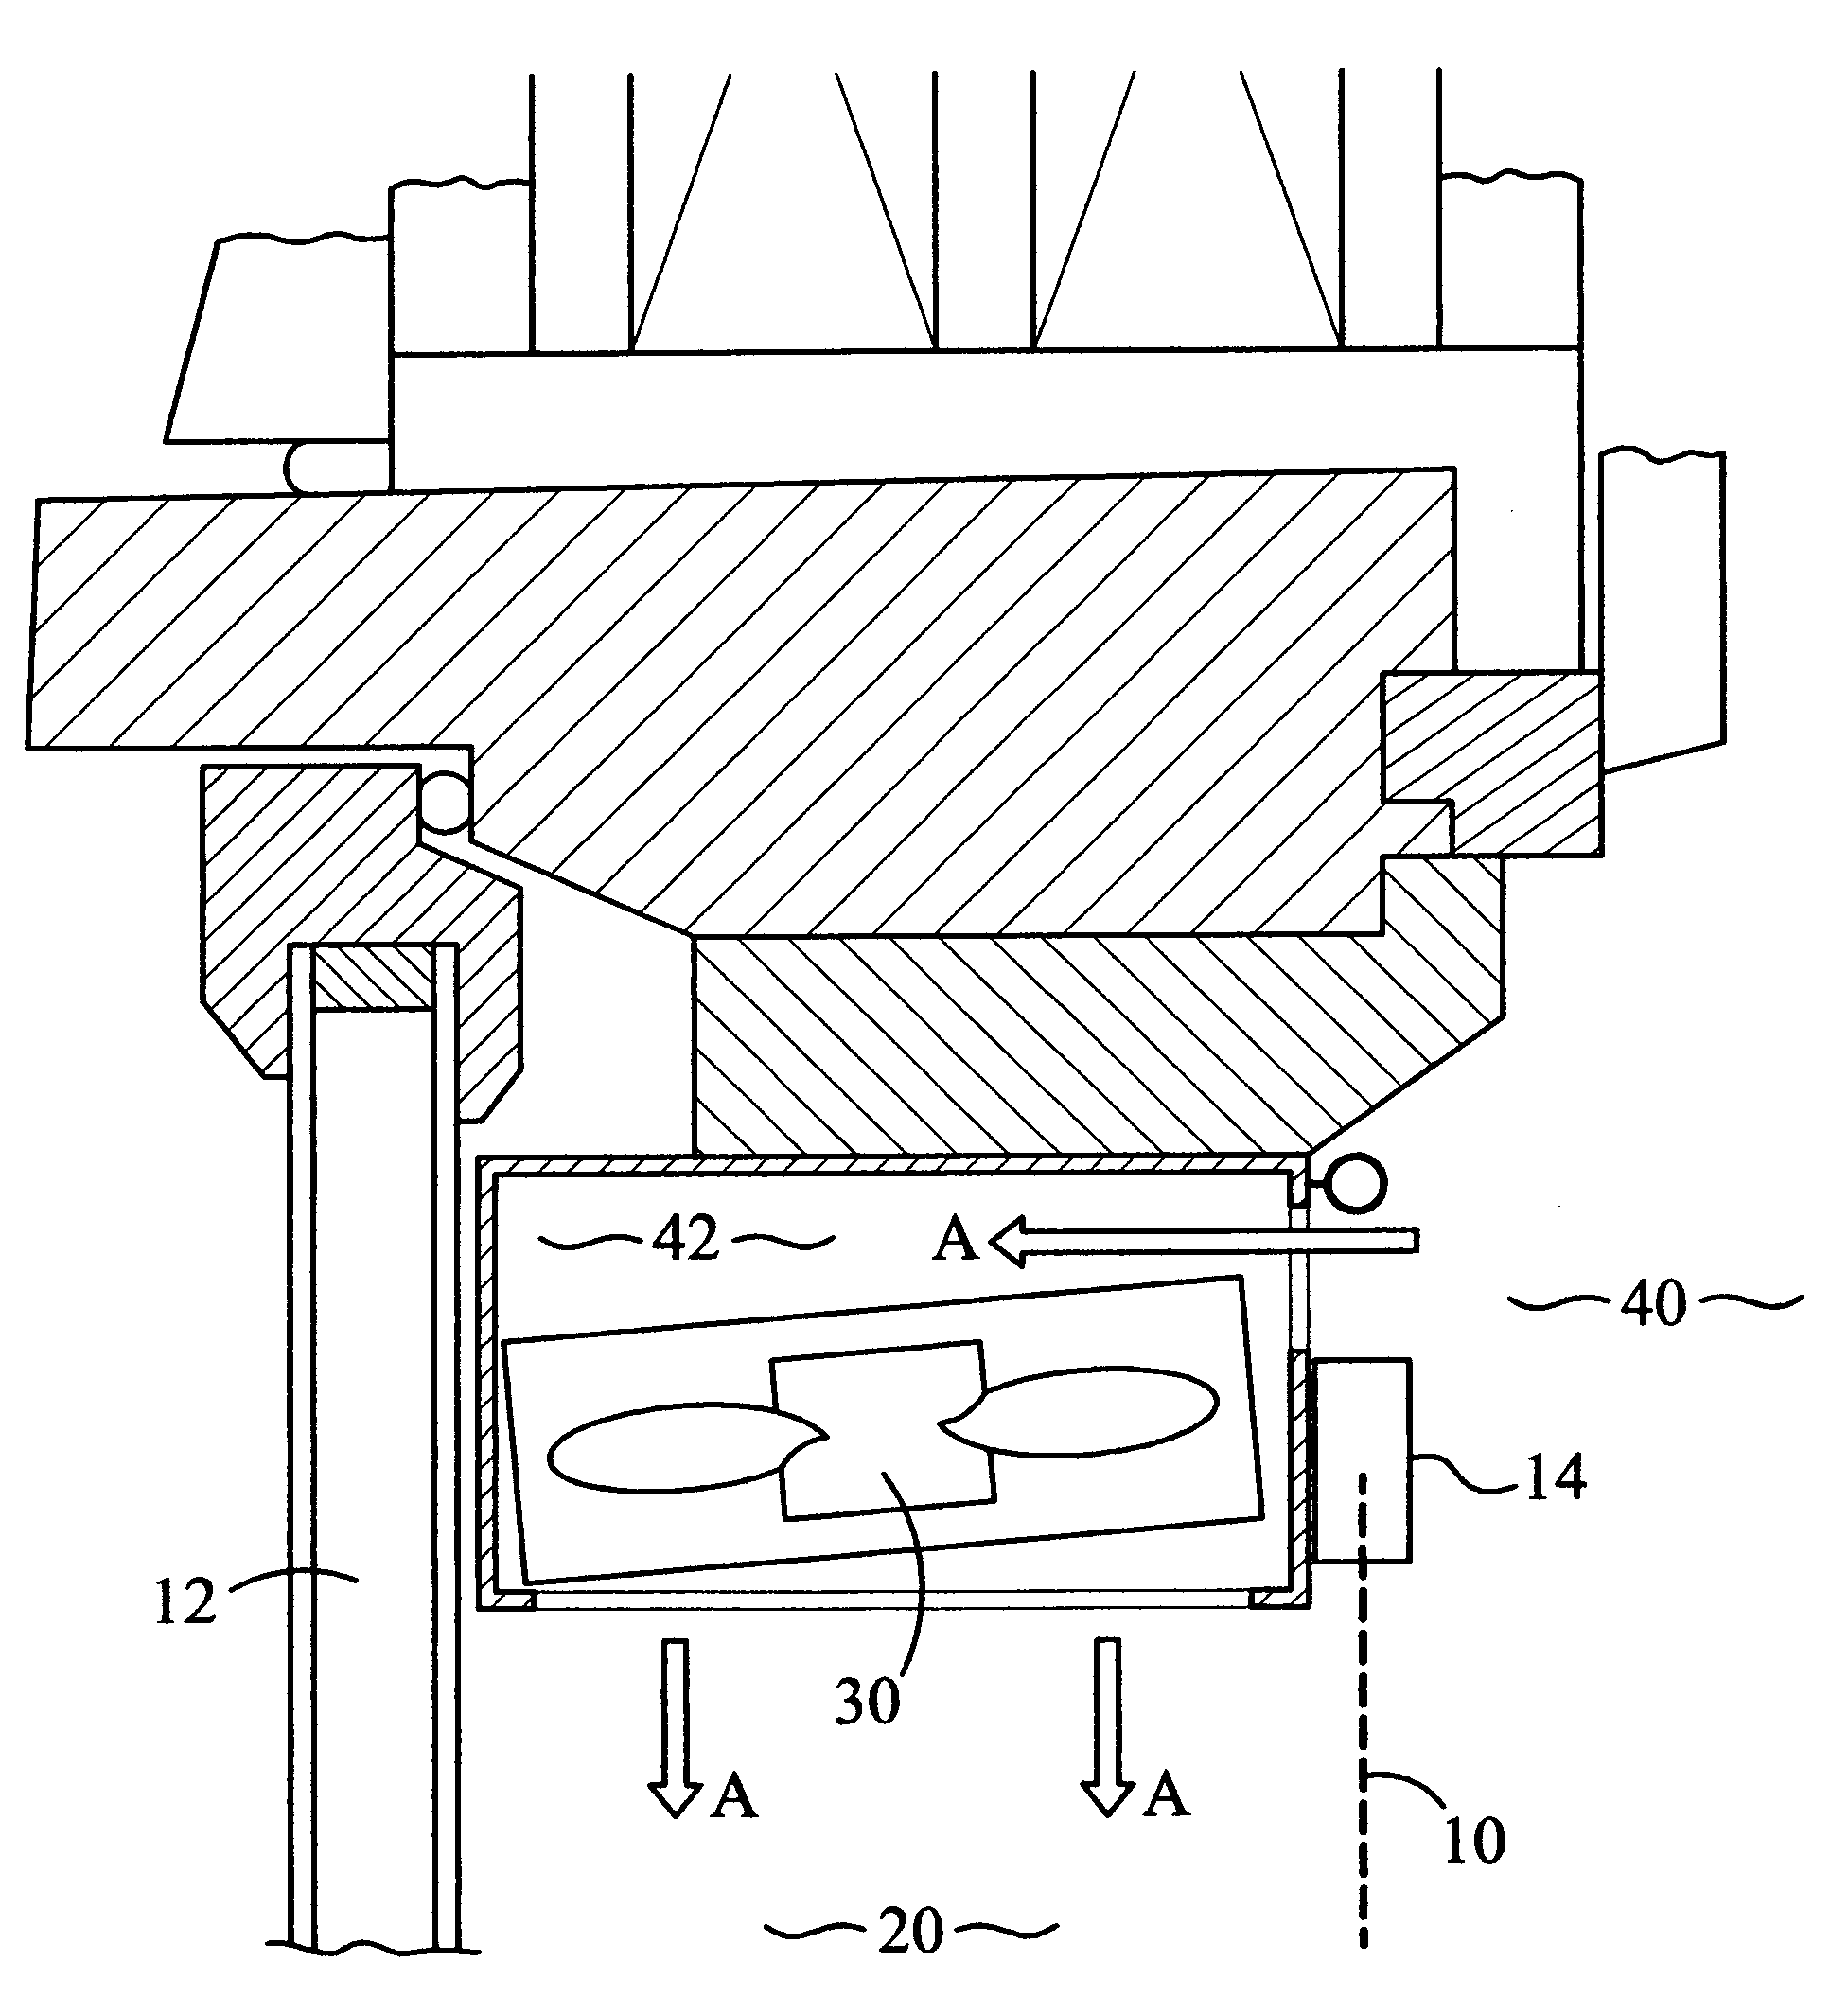 Solar heat absorbing and distributing system